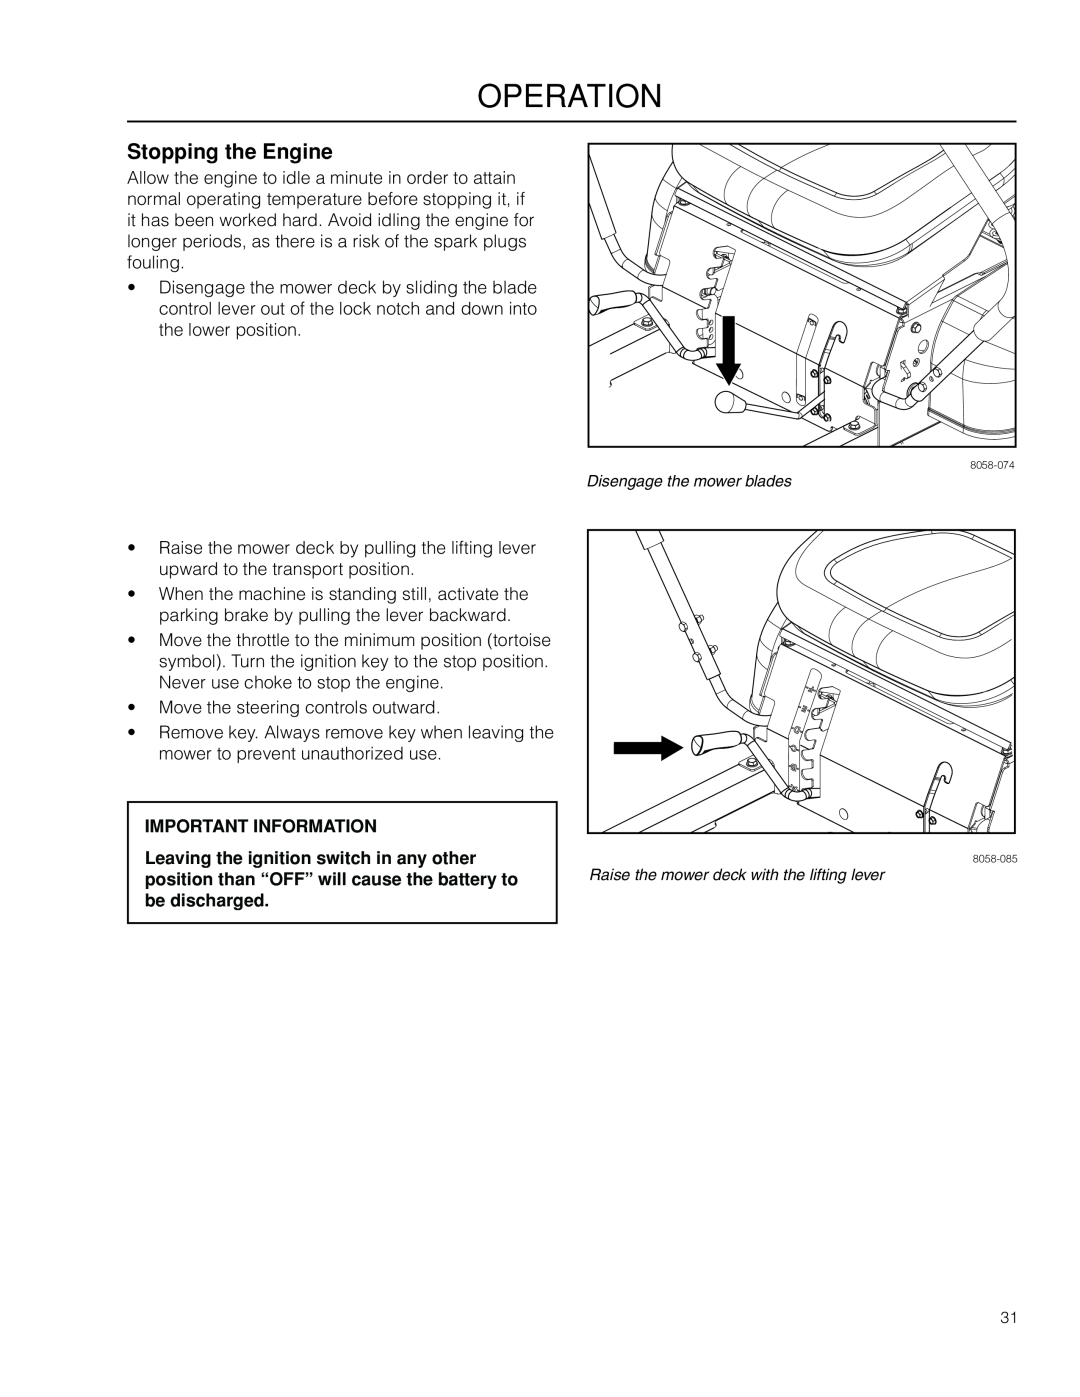 McCulloch 966582001, ZM3816 BF manual Stopping the Engine, operation, Important Information 